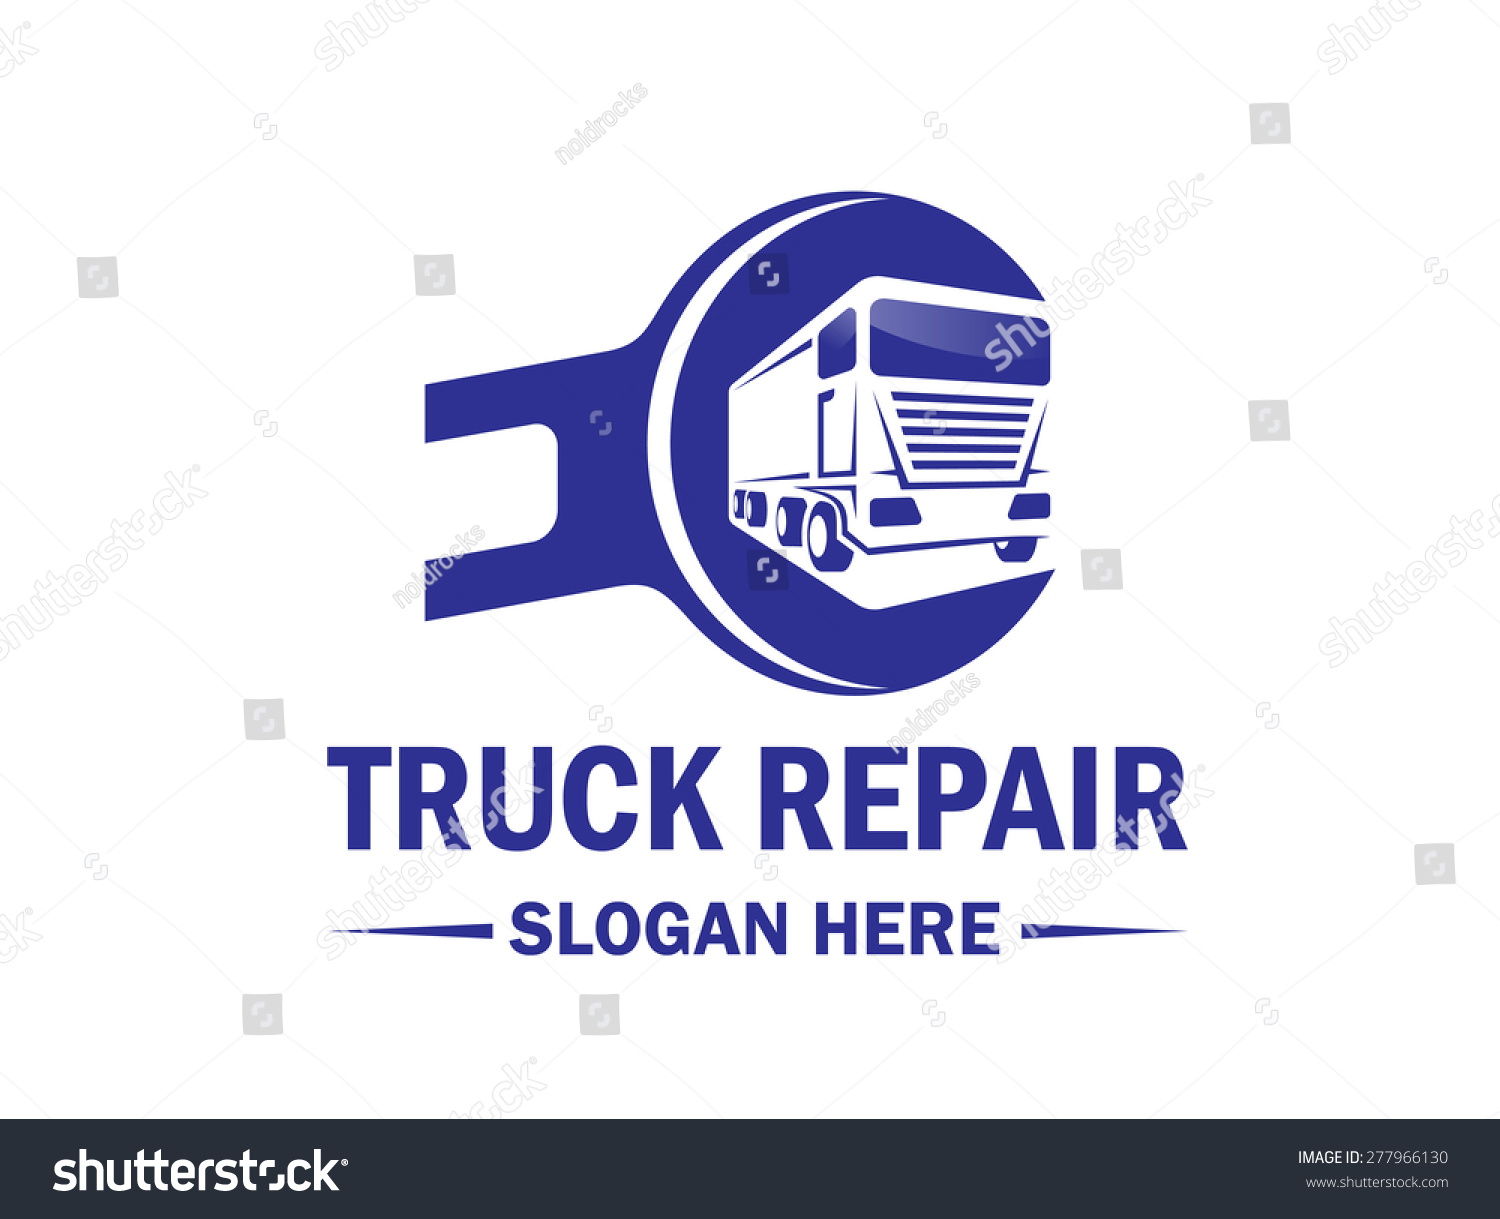 Truck Repair Logo Vector Design Template. The Shape Of A Truck Forms ...